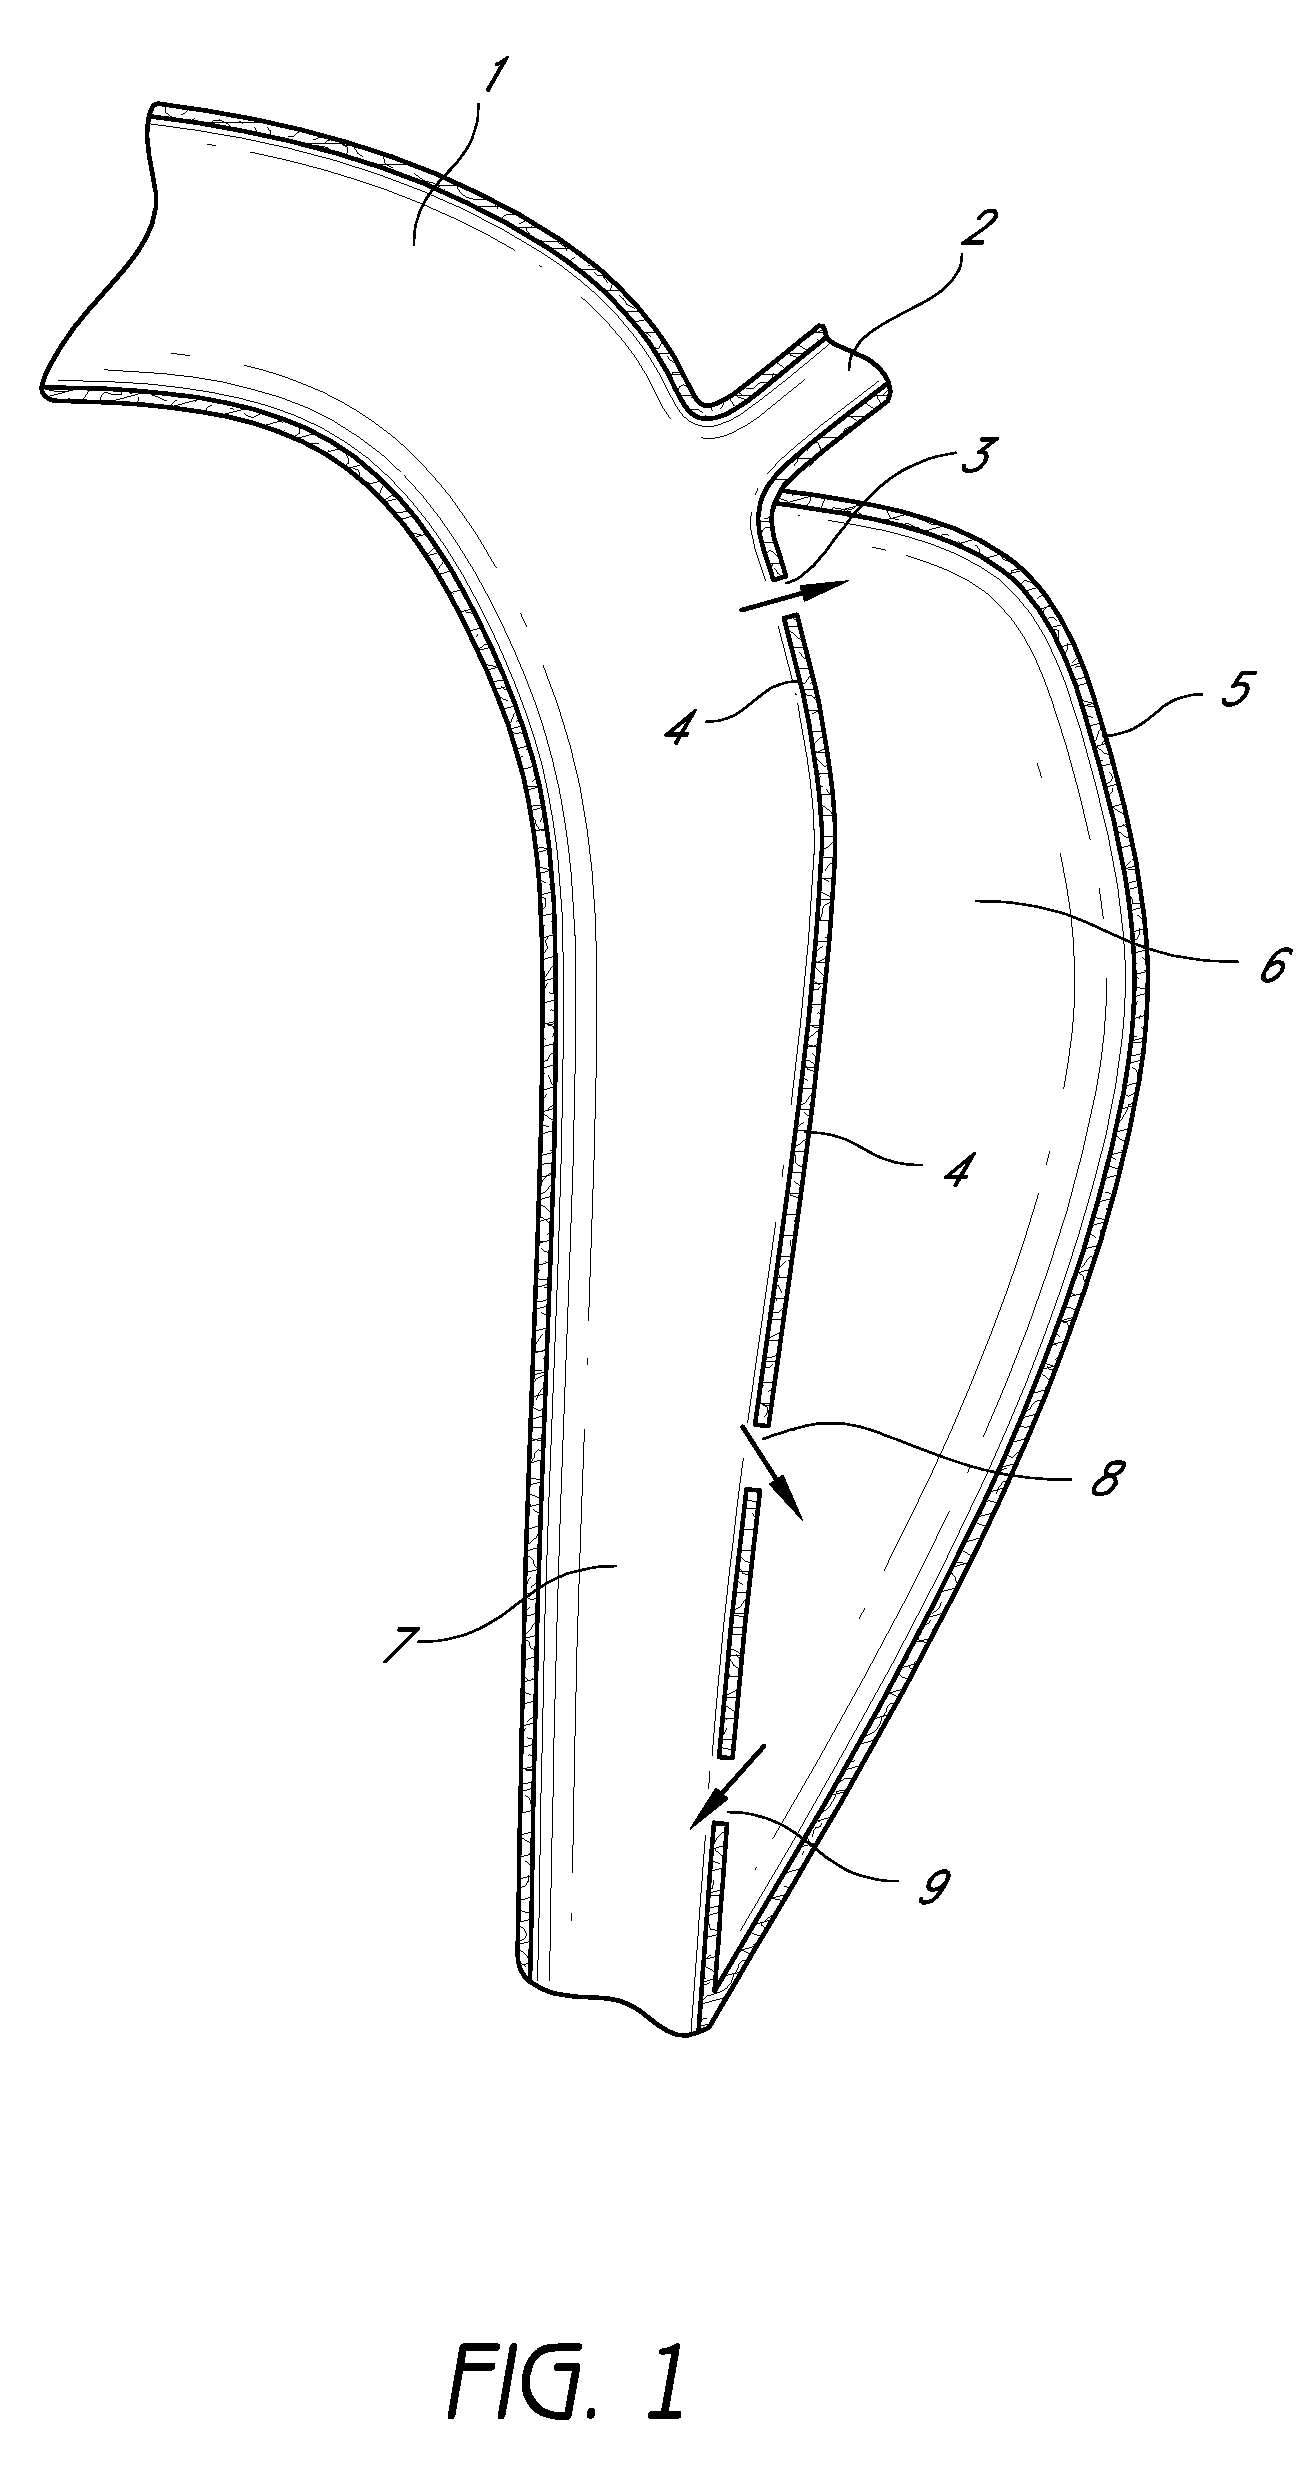 Devices and methods to treat vascular dissections